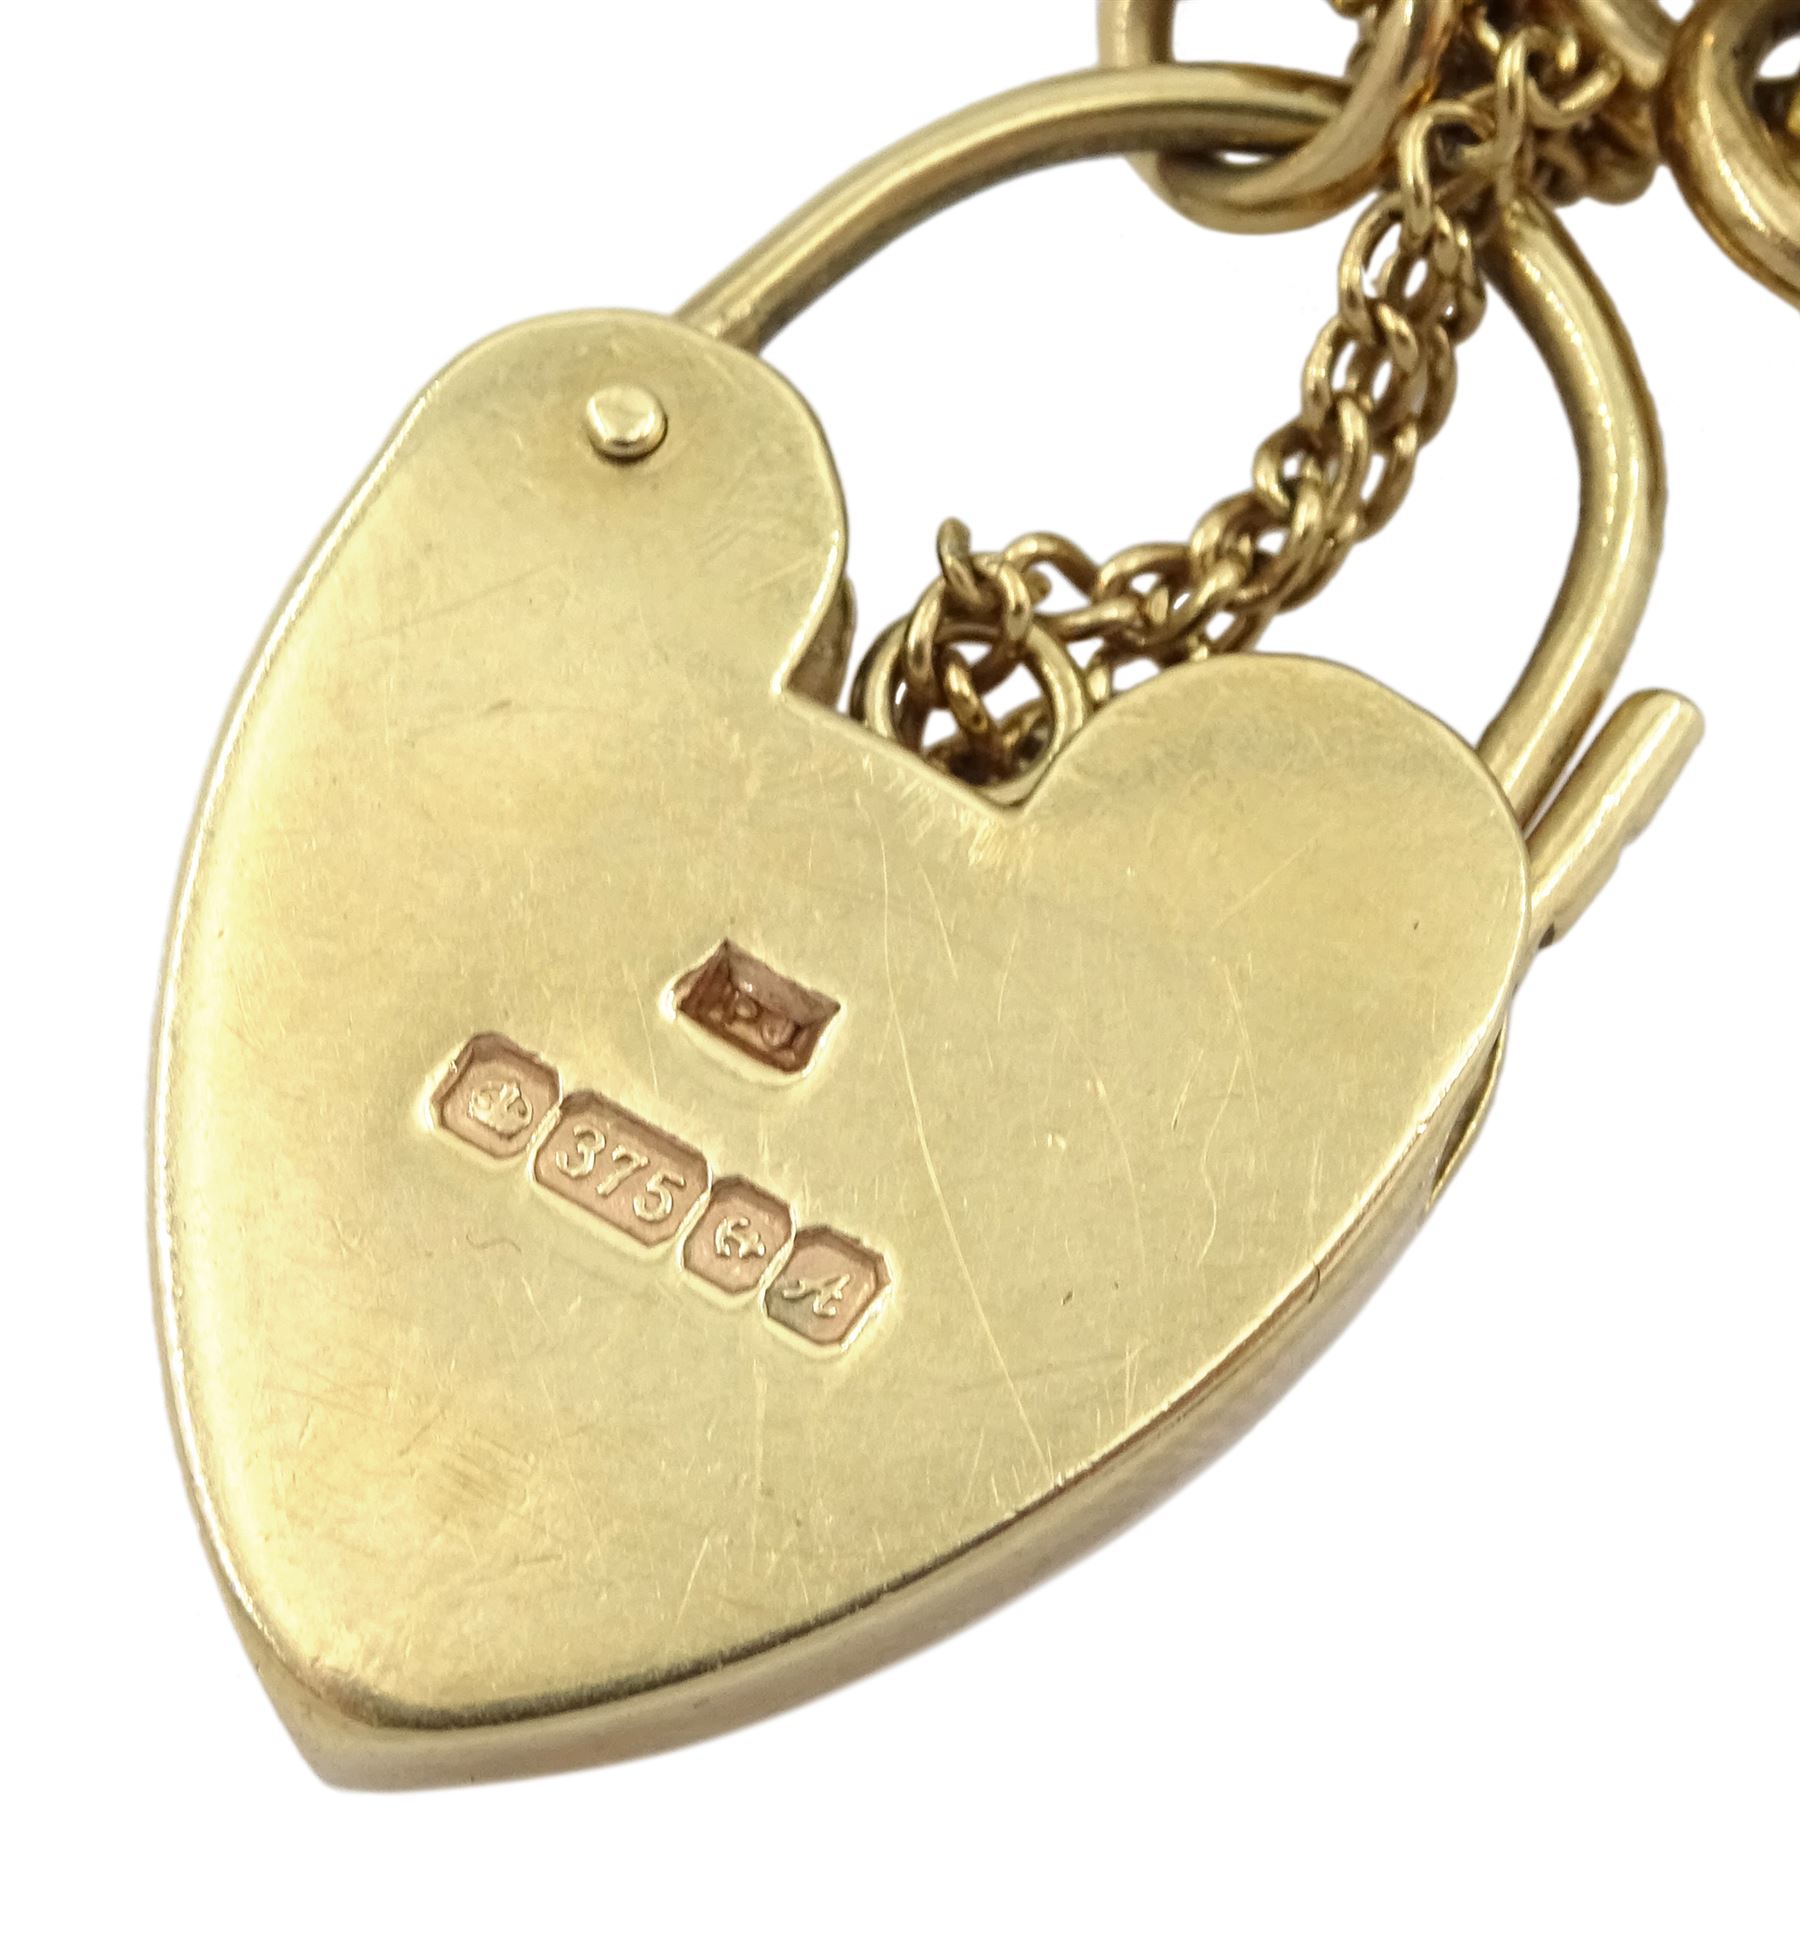 9ct gold oval link bracelet with heart locket clasp - Image 2 of 2